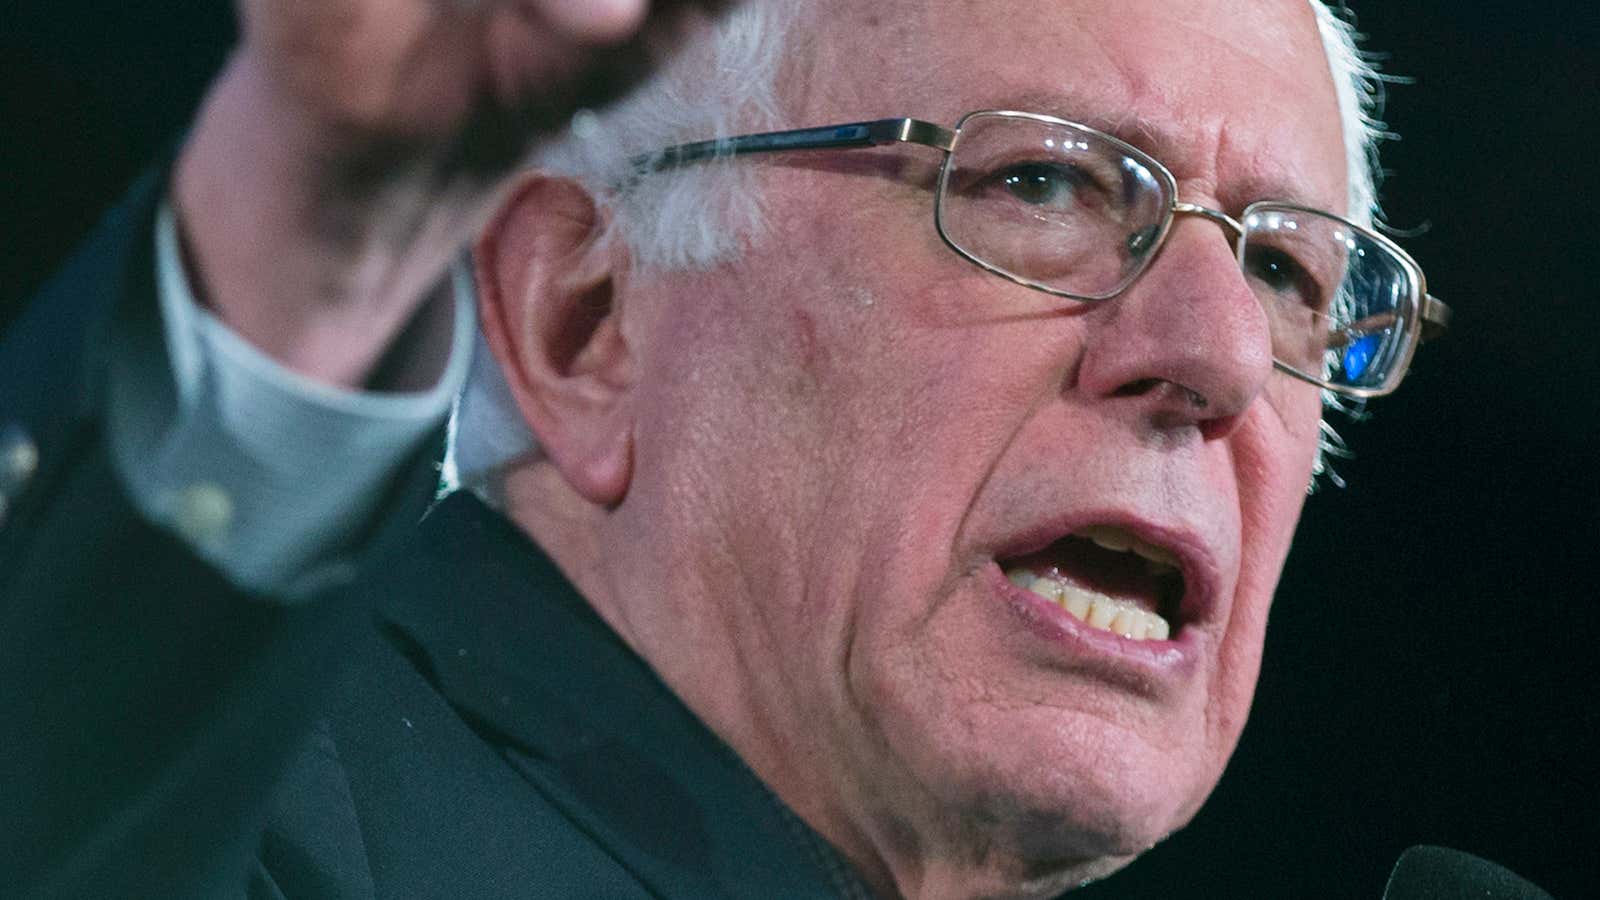 The voters who back Sanders don’t see his ideas as unrealistic.